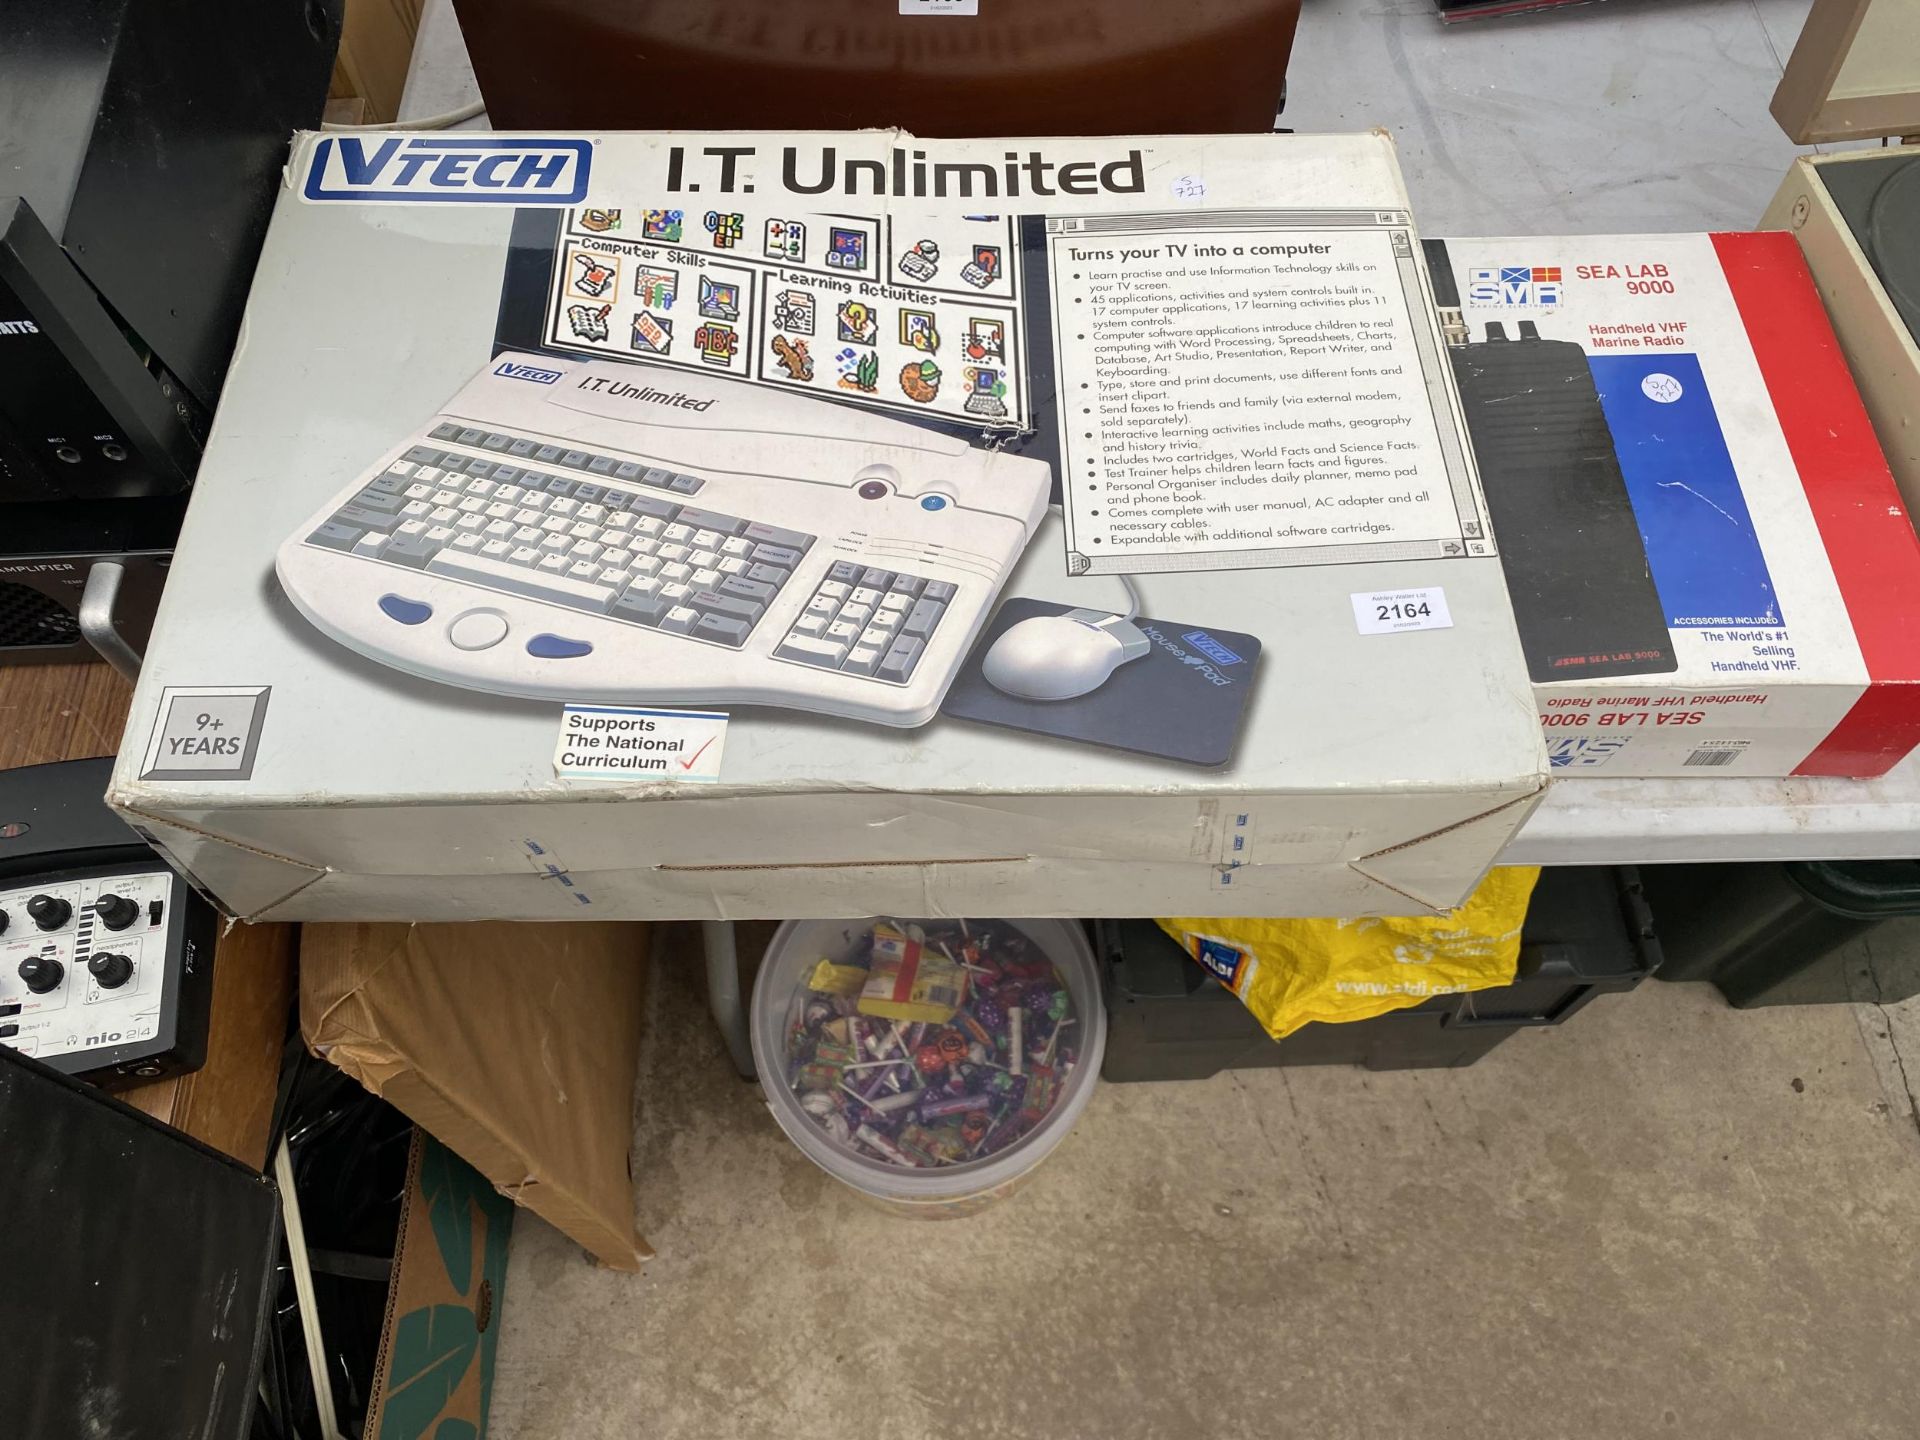 A VTECH I.T UNLIMITED COMPUTER CONVERTOR AND A SMR SEA LAB